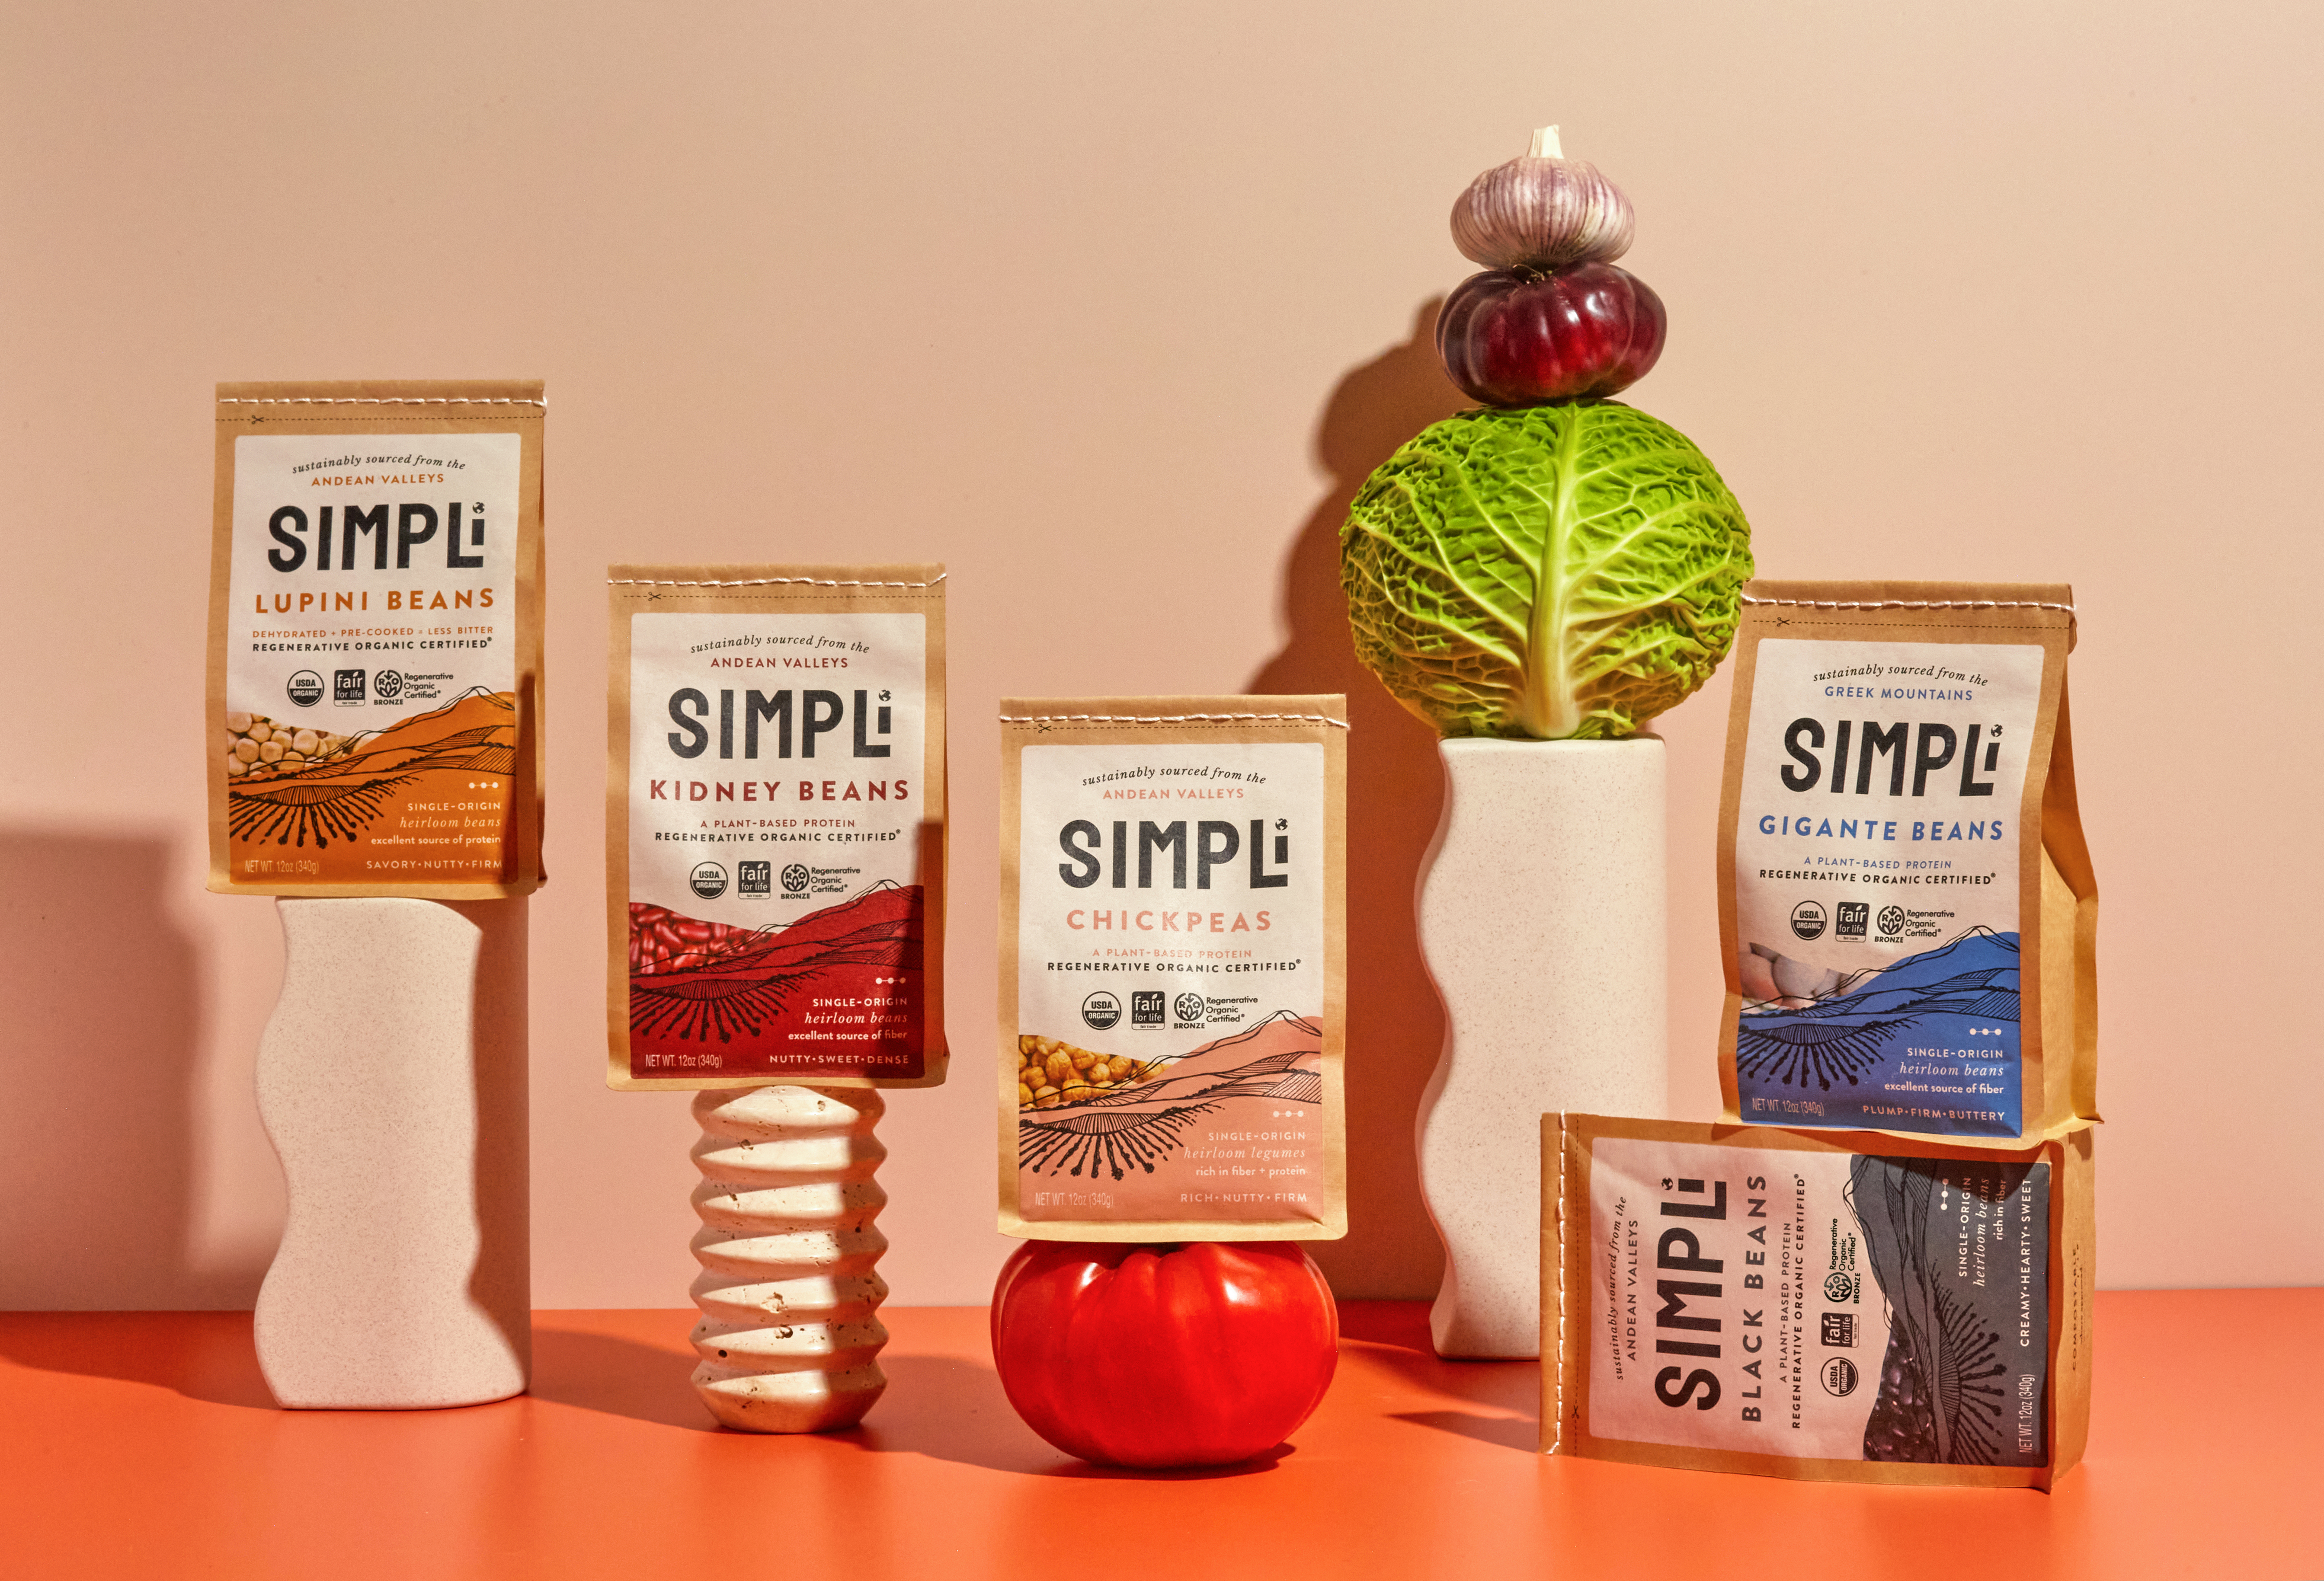 SIMPLi products in display